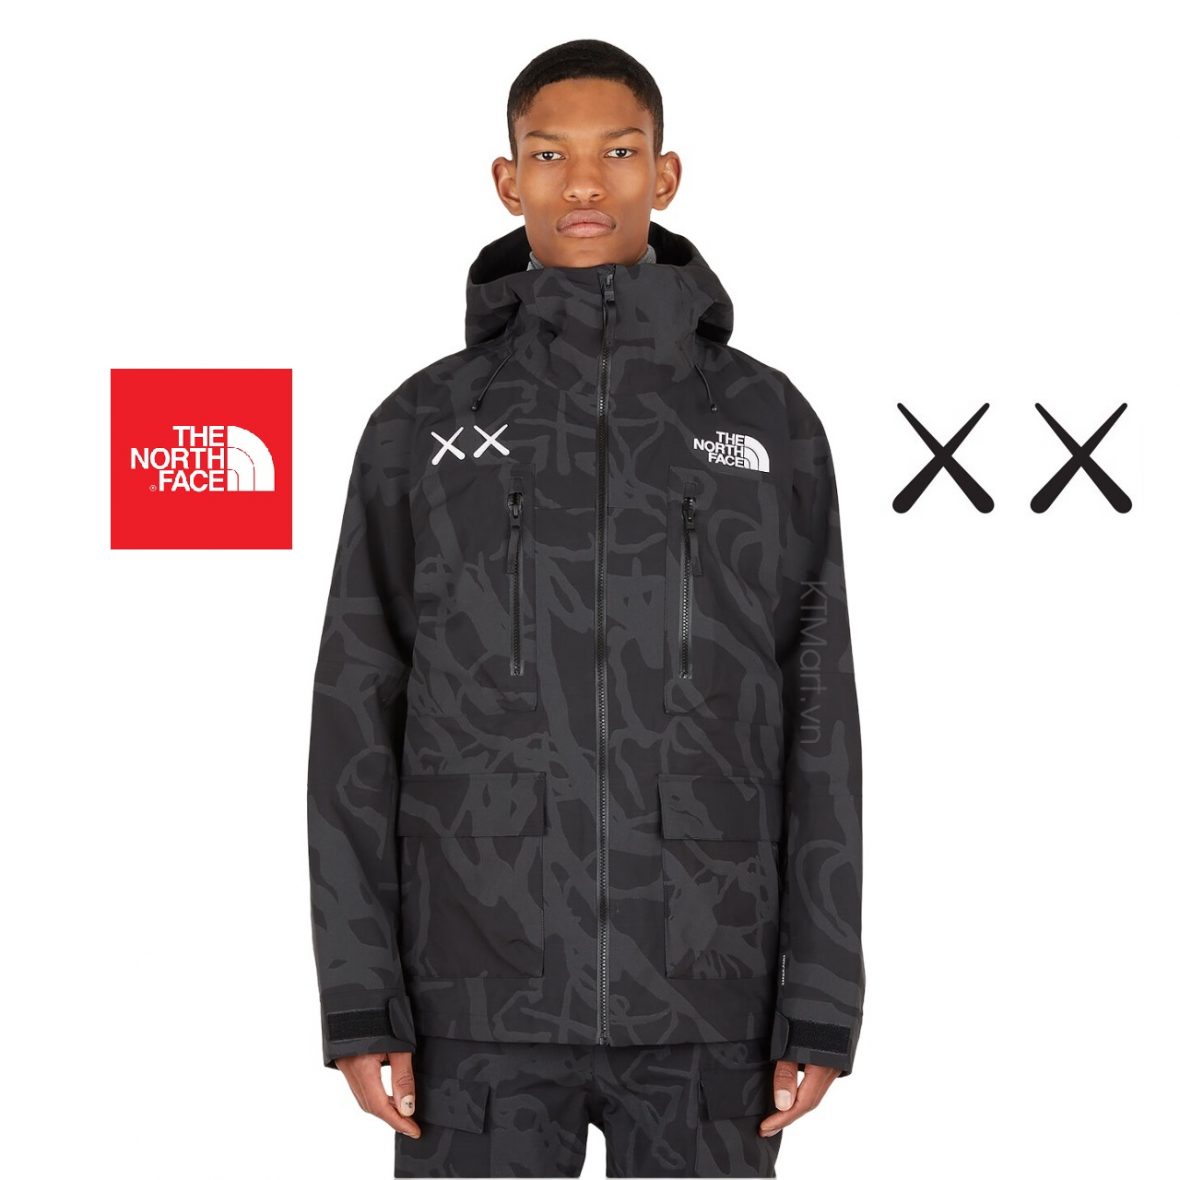 THE NORTH FACE x KAWS Freeride Jacket NF0A7WLQ size M